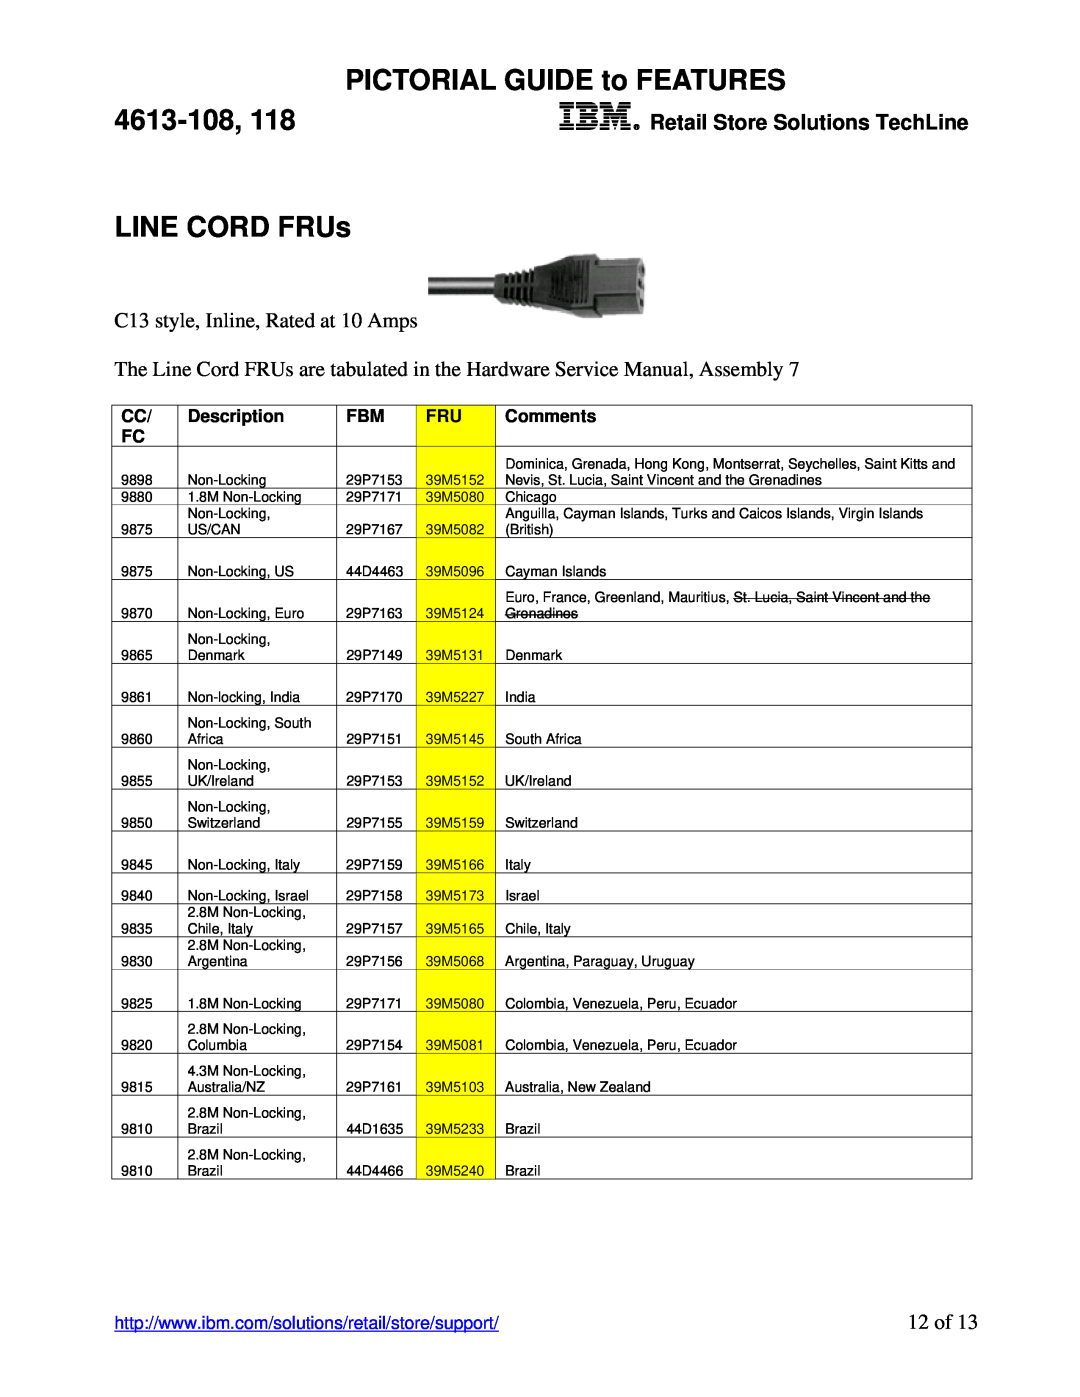 IBM E08, E18, 118 manual LINE CORD FRUs, 12 of, PICTORIAL GUIDE to FEATURES, 4613-108, Retail Store Solutions TechLine 